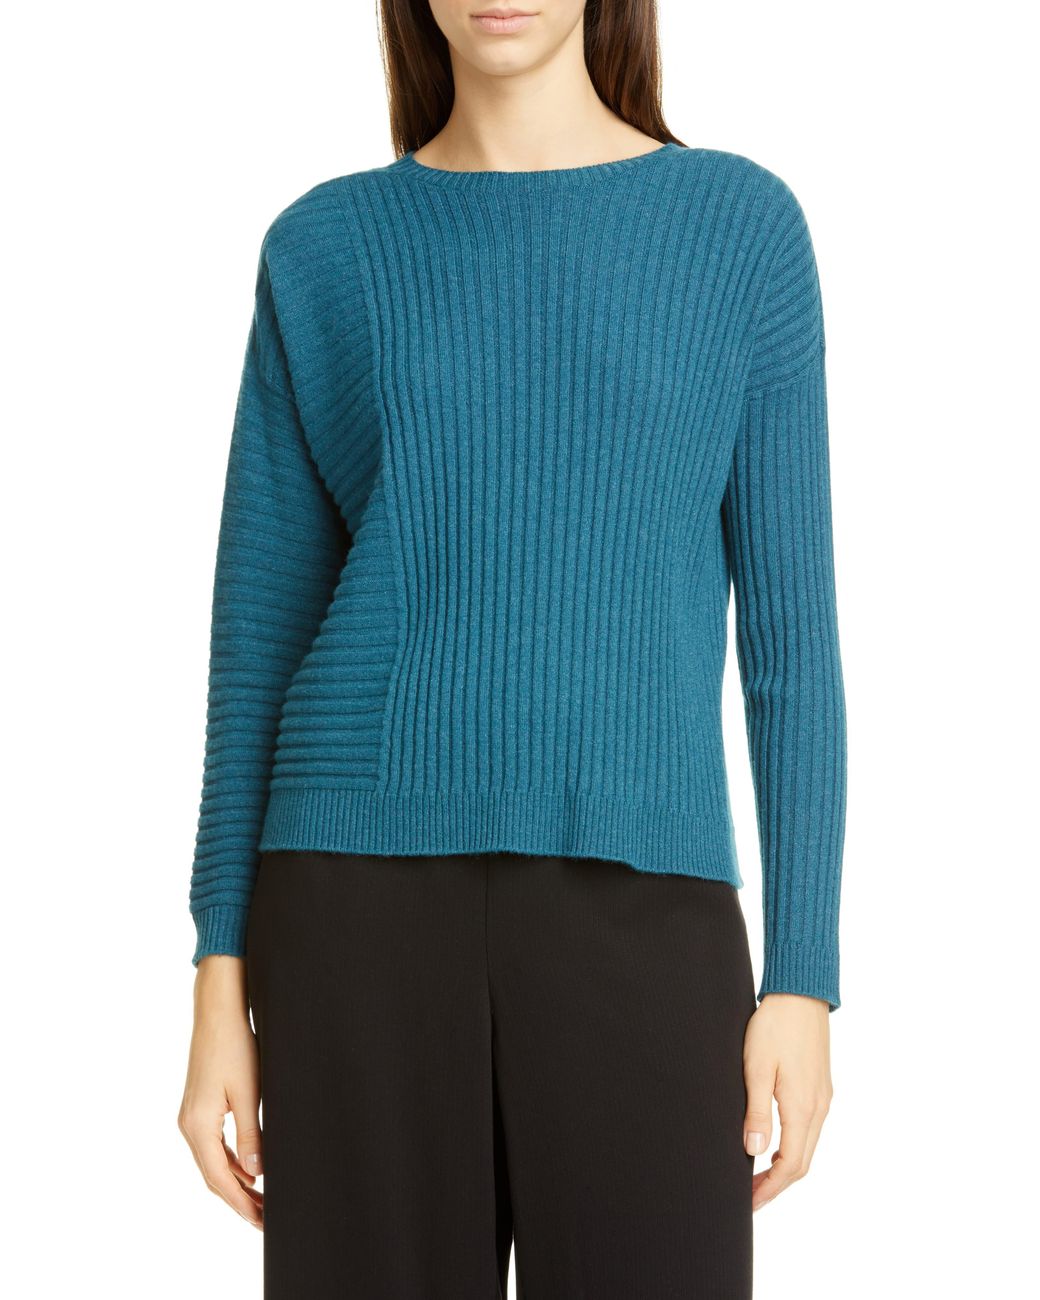 Eileen Fisher Bateau Neck Ribbed Cashmere Sweater in Blue - Lyst